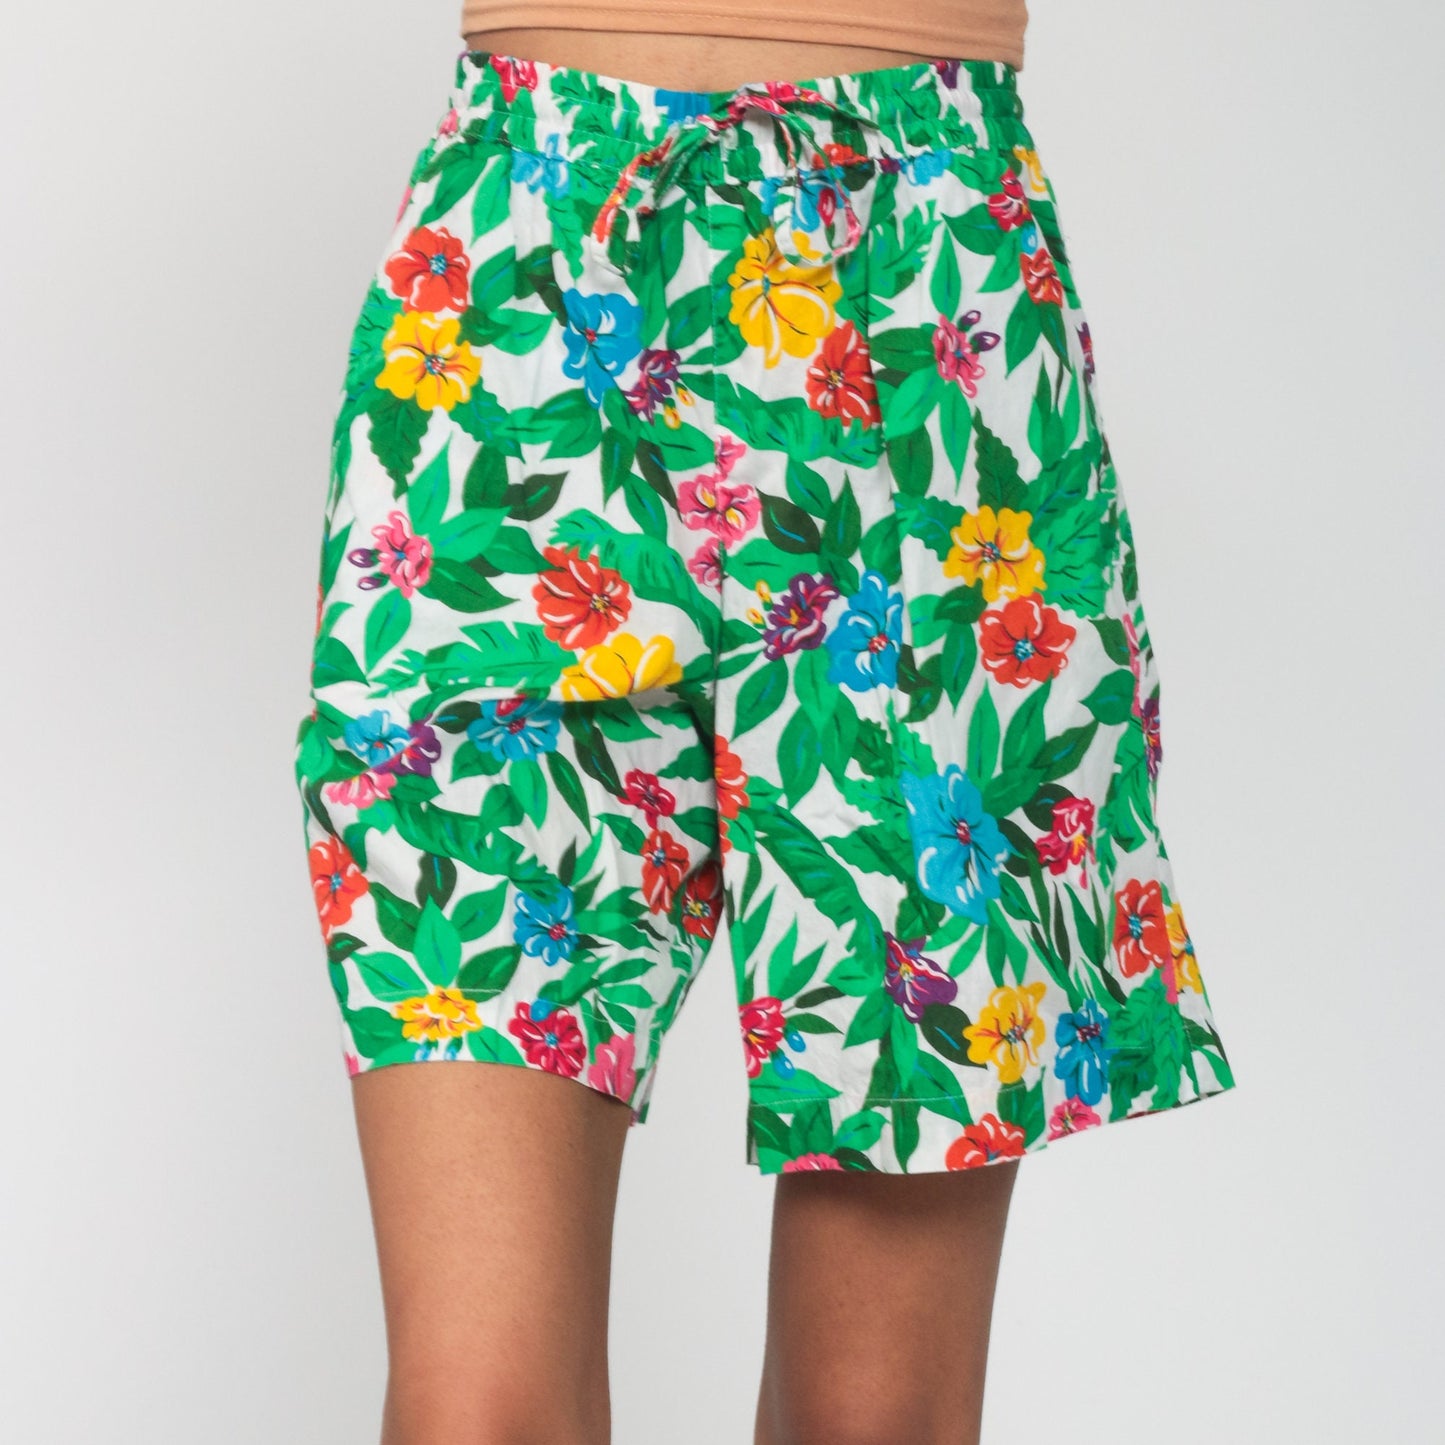 Tropical Floral Shorts 90s High Waisted Shorts Floral Summer Shorts Surfer Bright Green Shorts Retro 1990s Vintage Small s